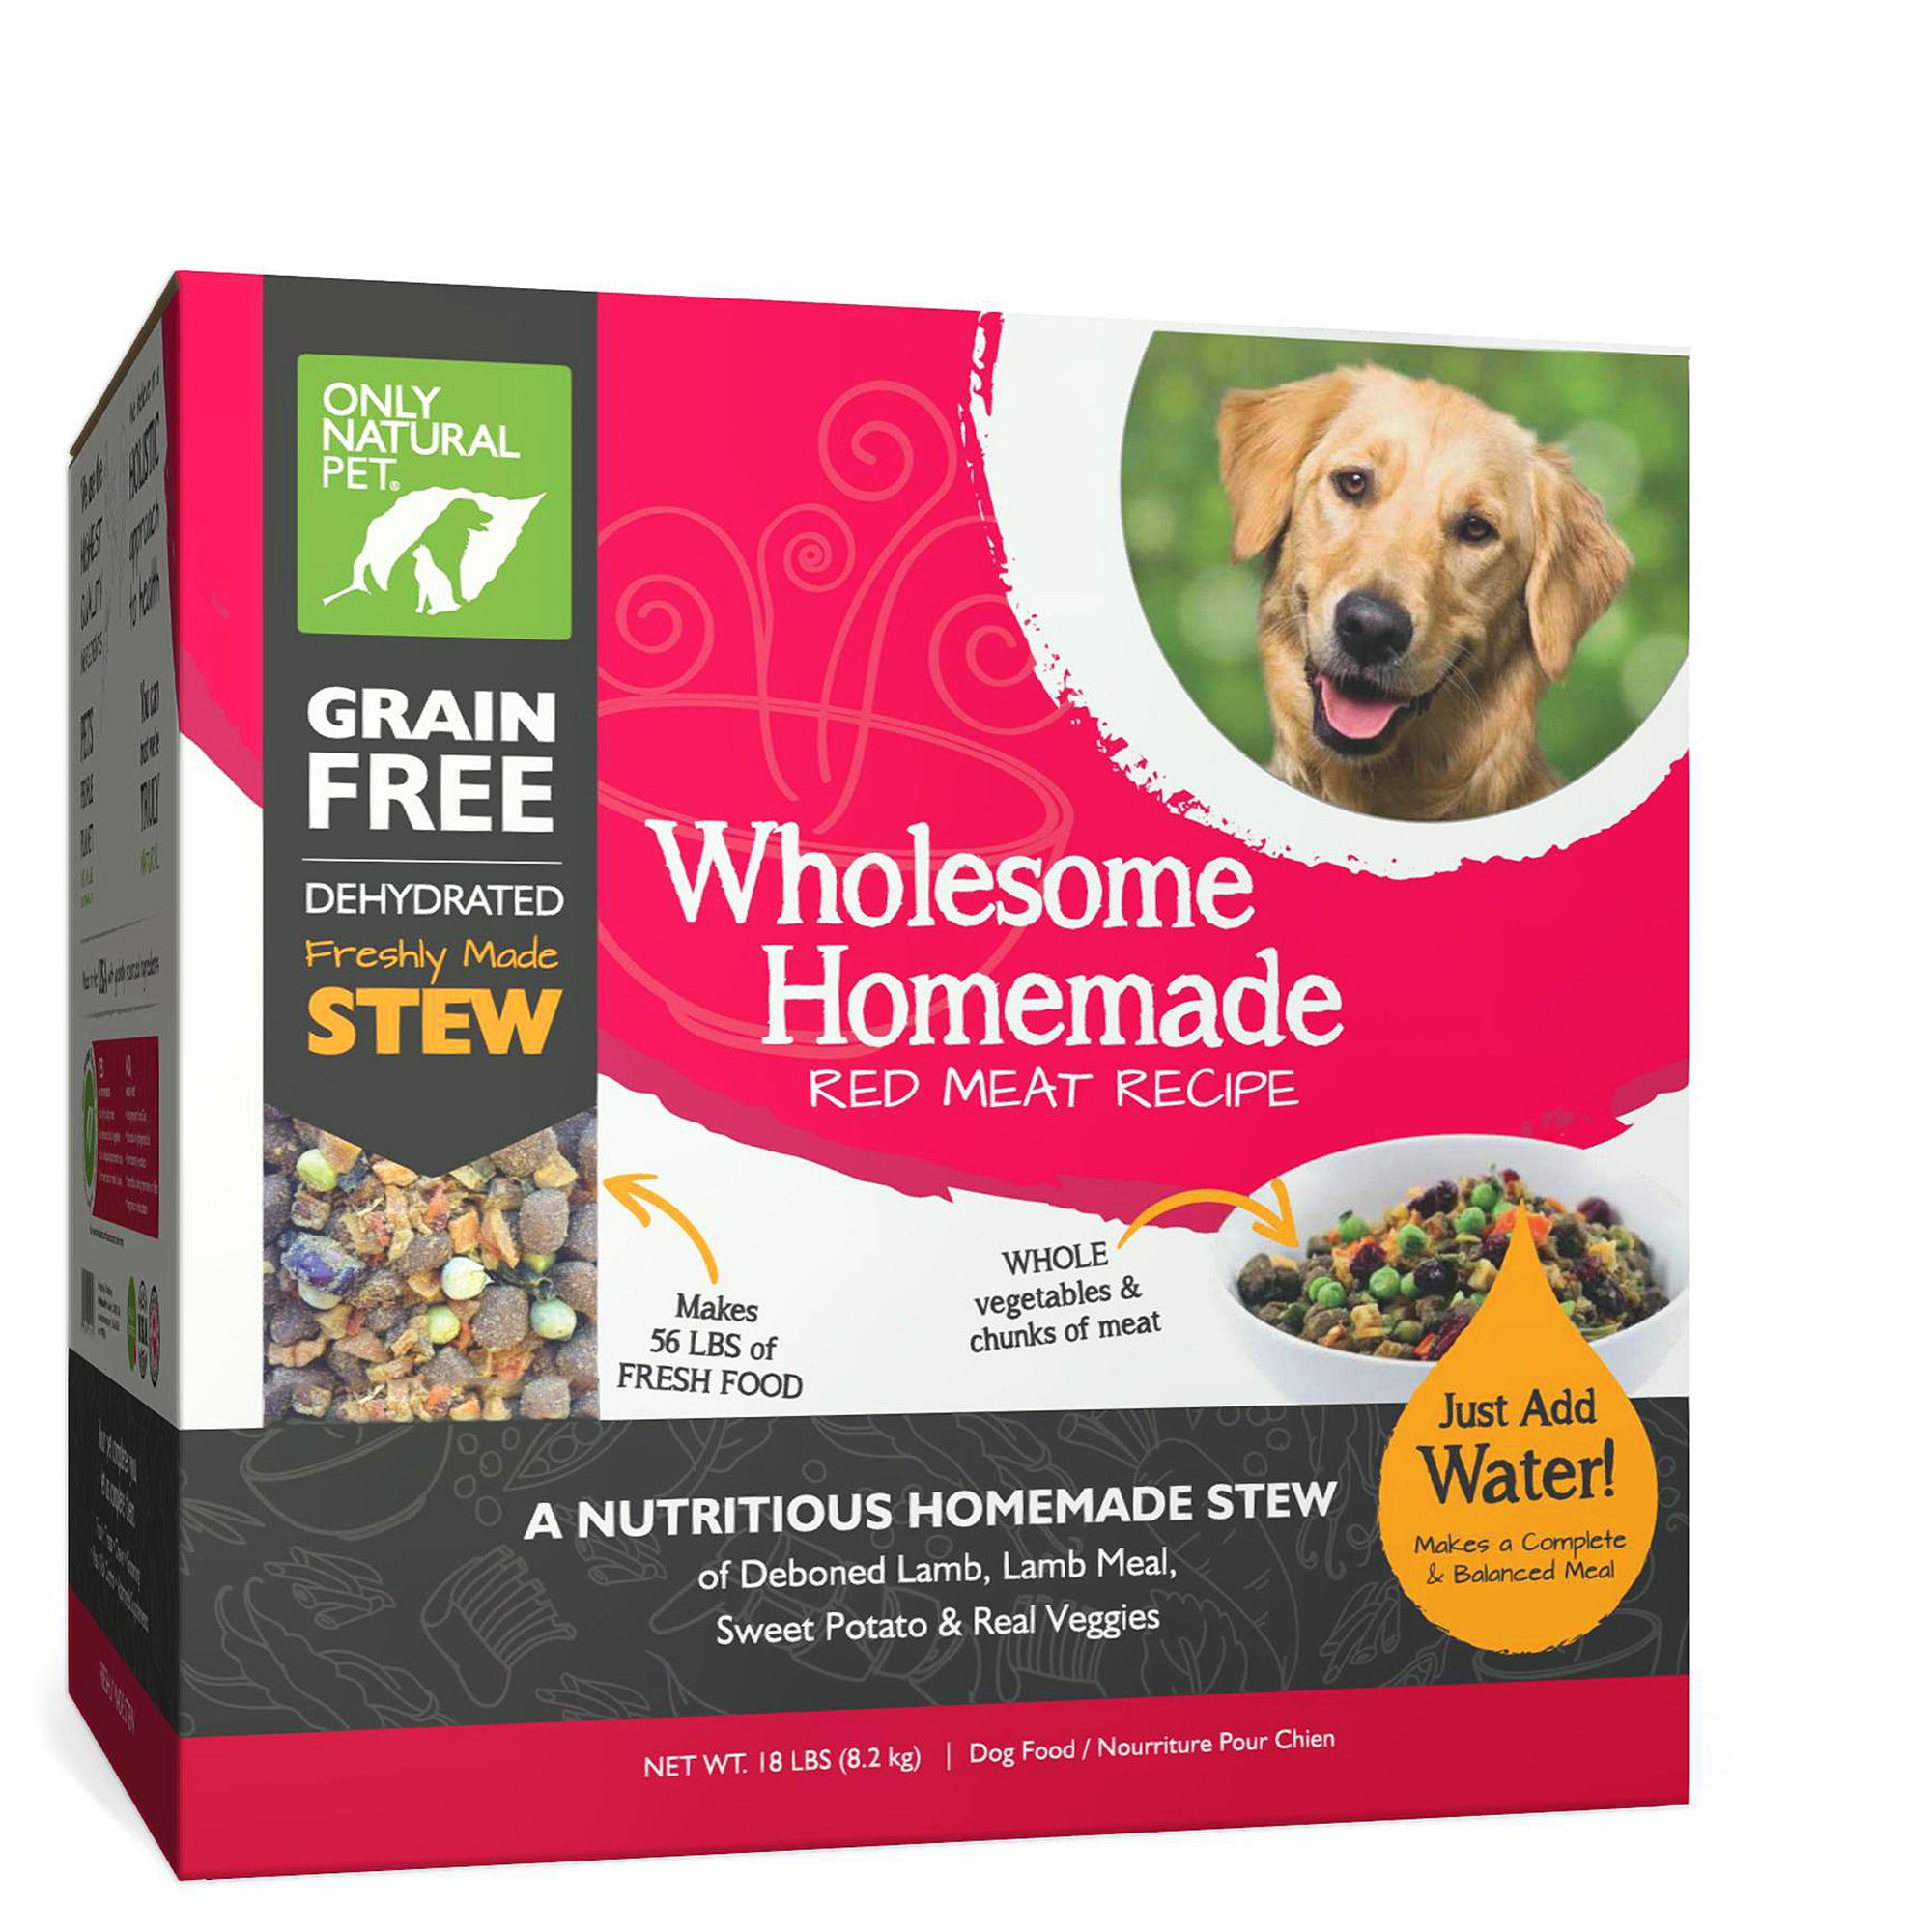 Only Natural Pet® Wholesome Homemade 